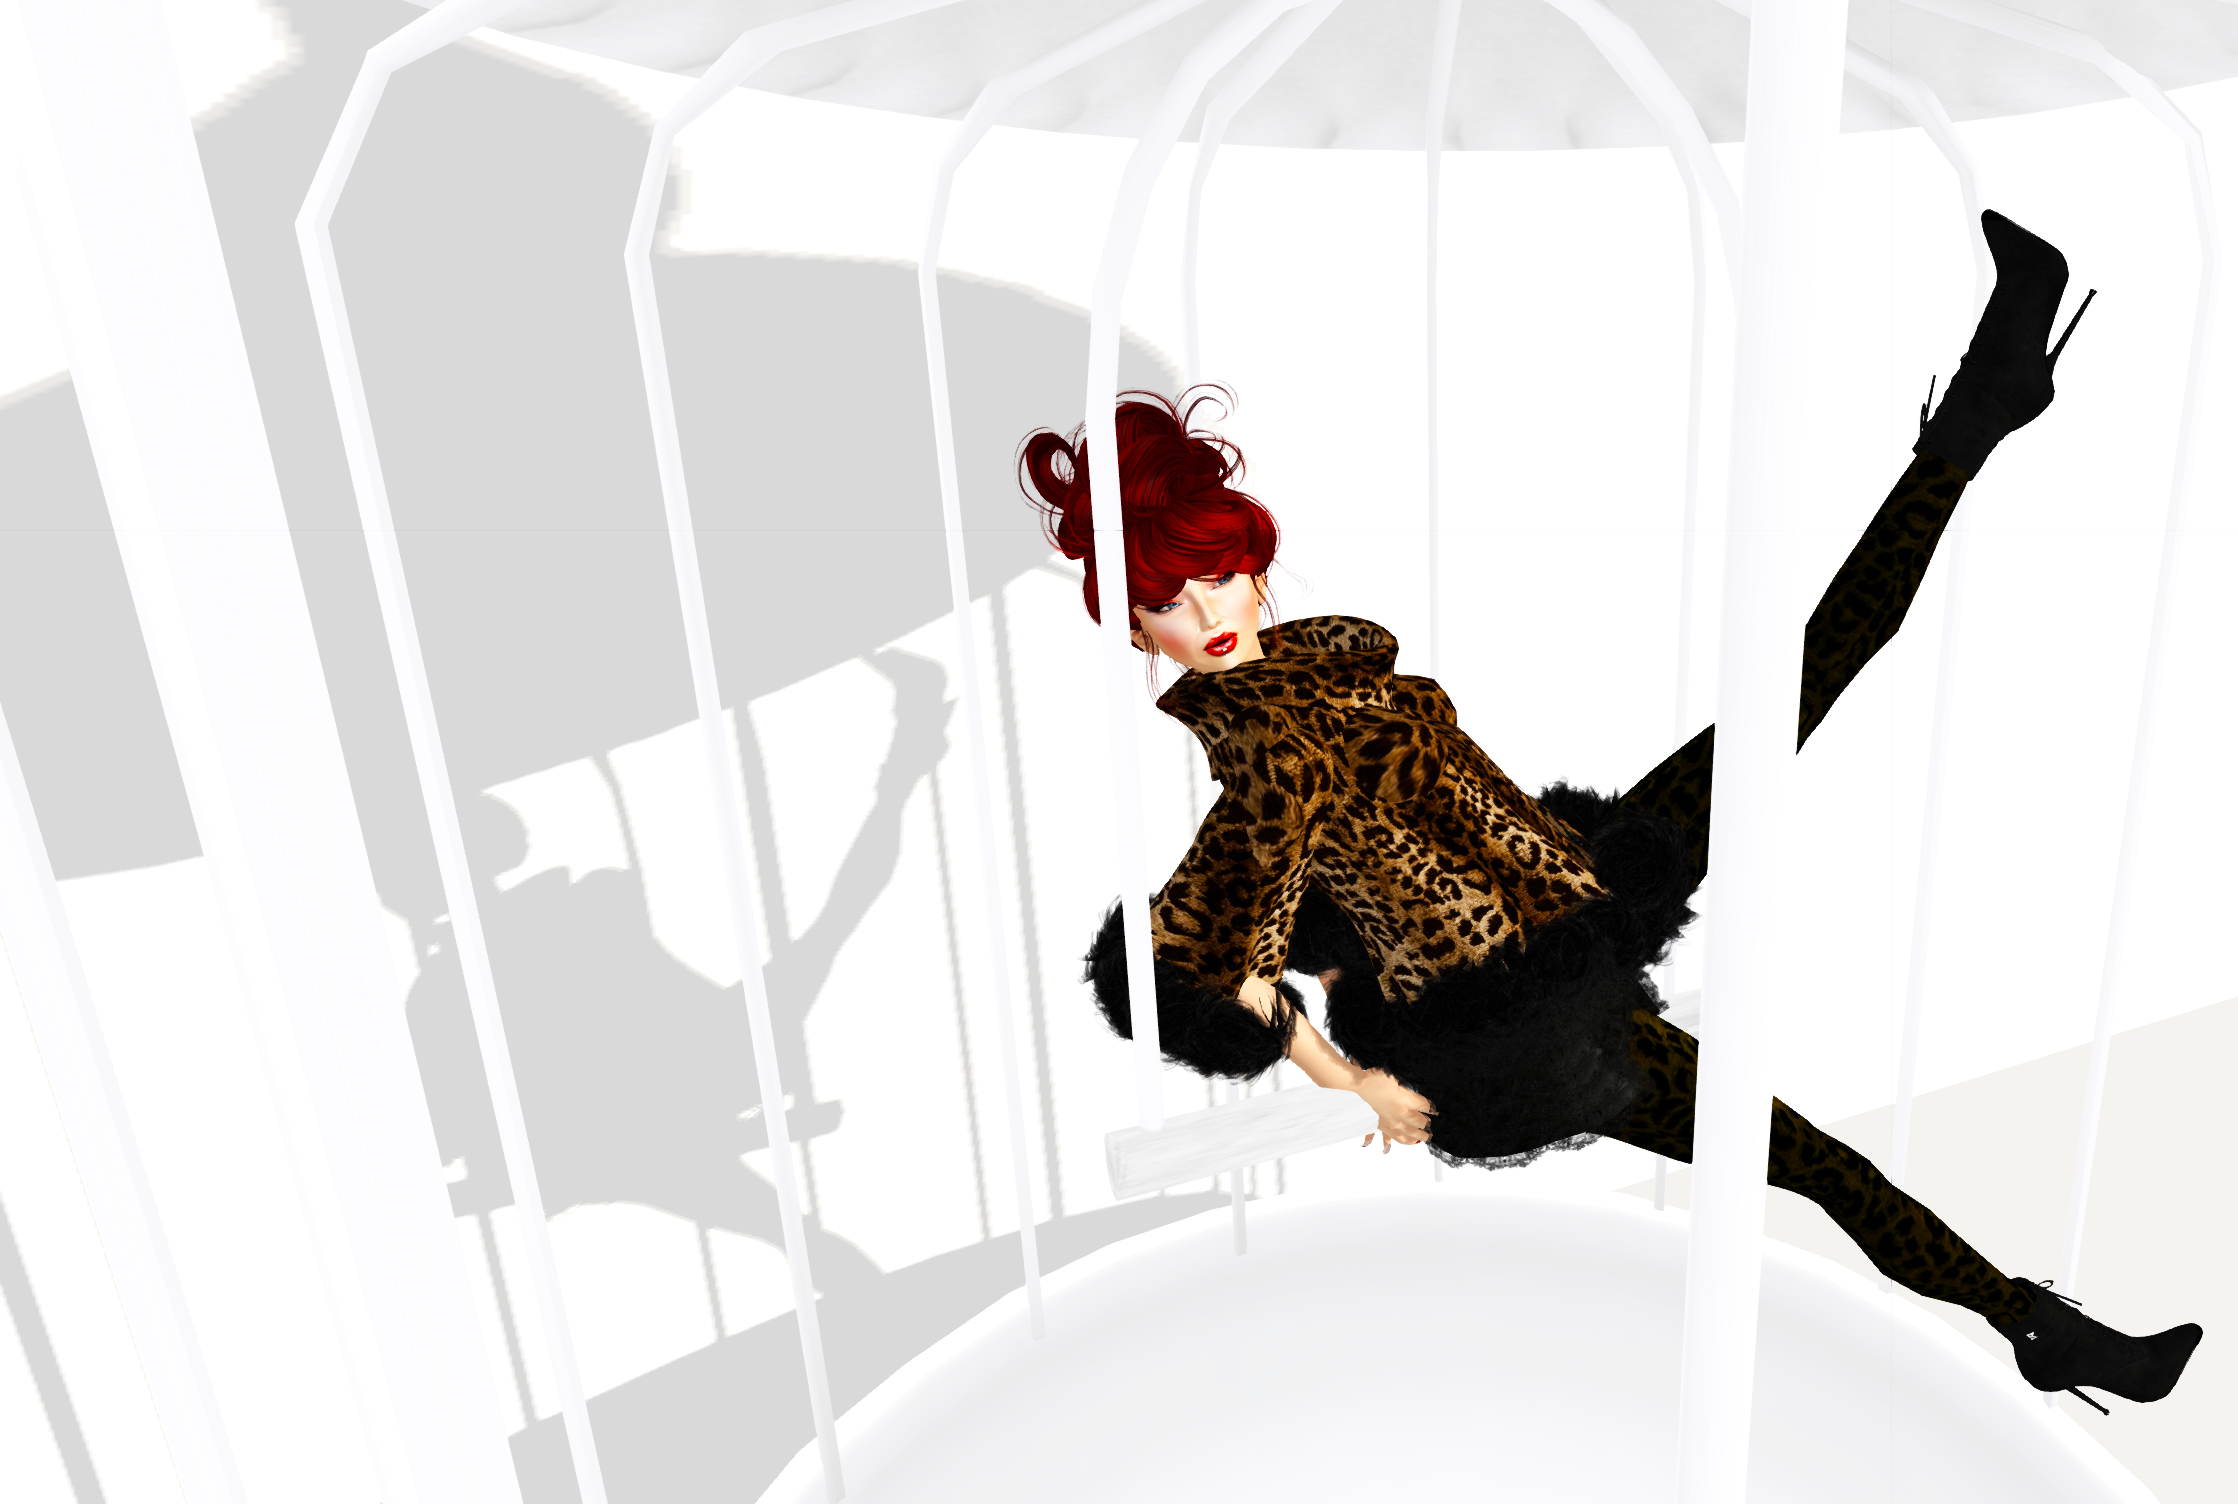 This bird cage pose prop from Ilaya just really tickled my feathers